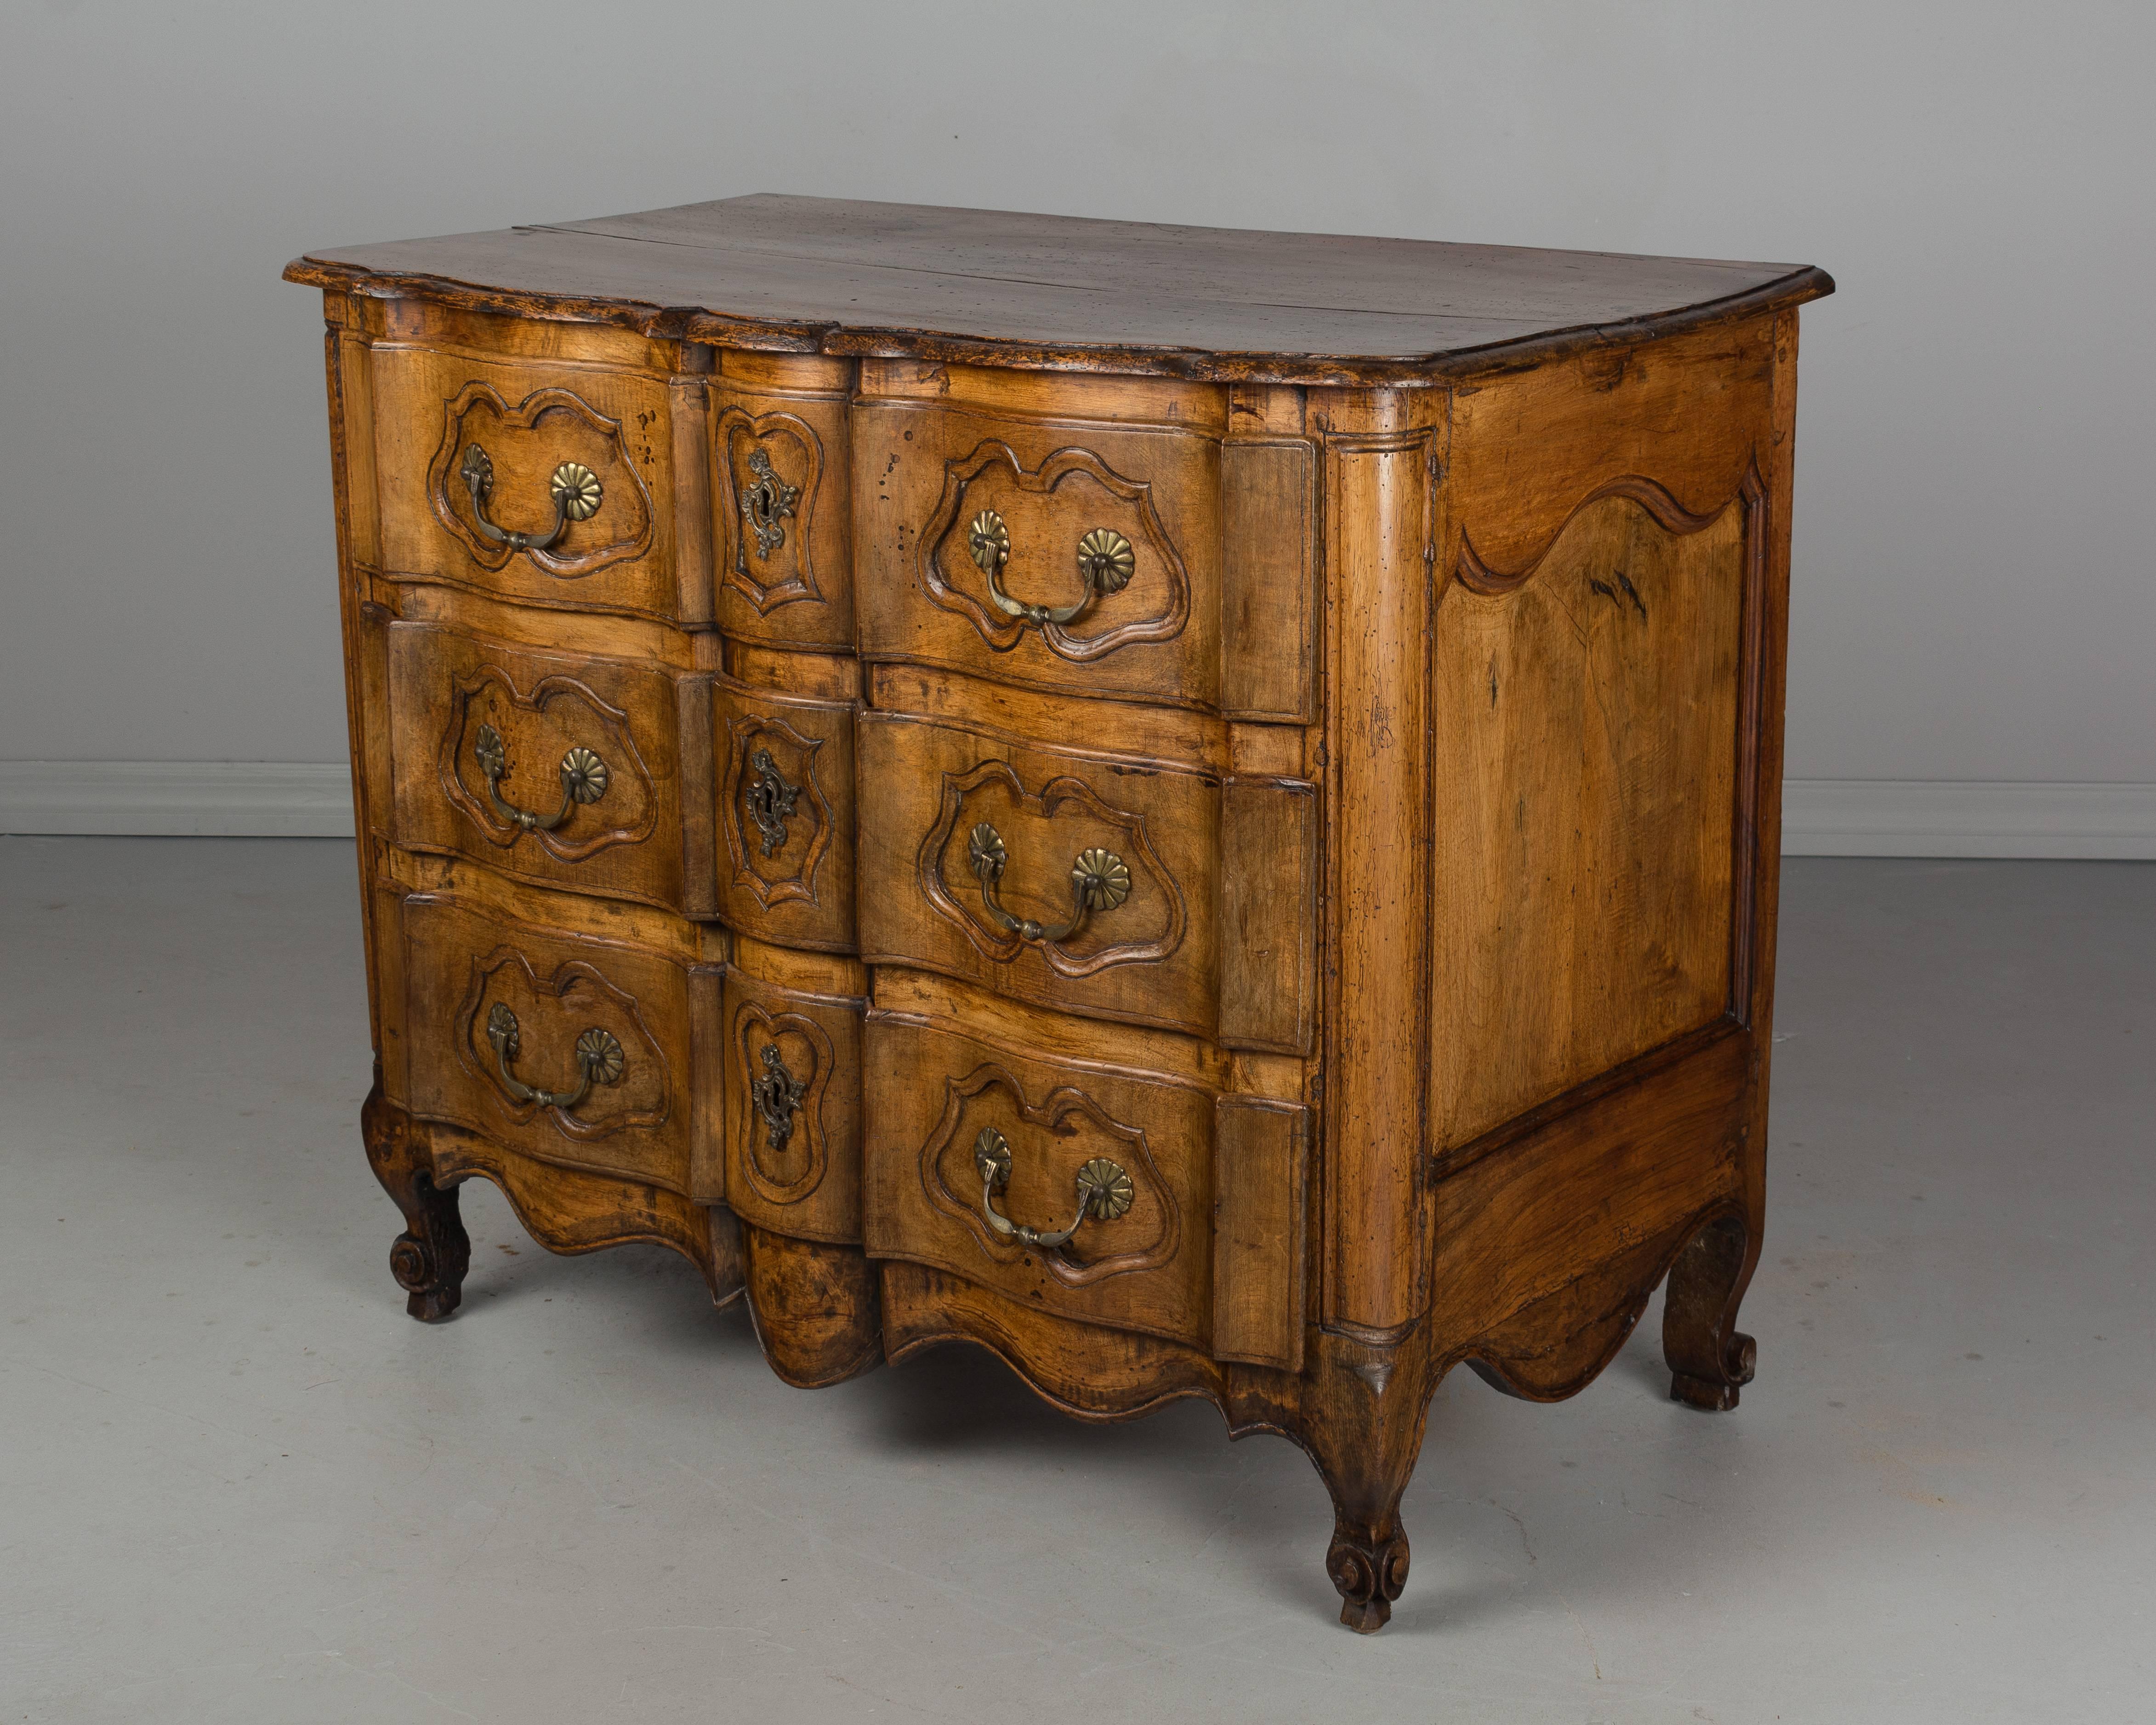 A 19th century French Louis XV style commode with an arbalete, or crossbow, front made of walnut. Three dovetailed drawers with carved details. Brass hardware is of the period, but not original to the piece. Waxed patina. Front legs are replaced. A